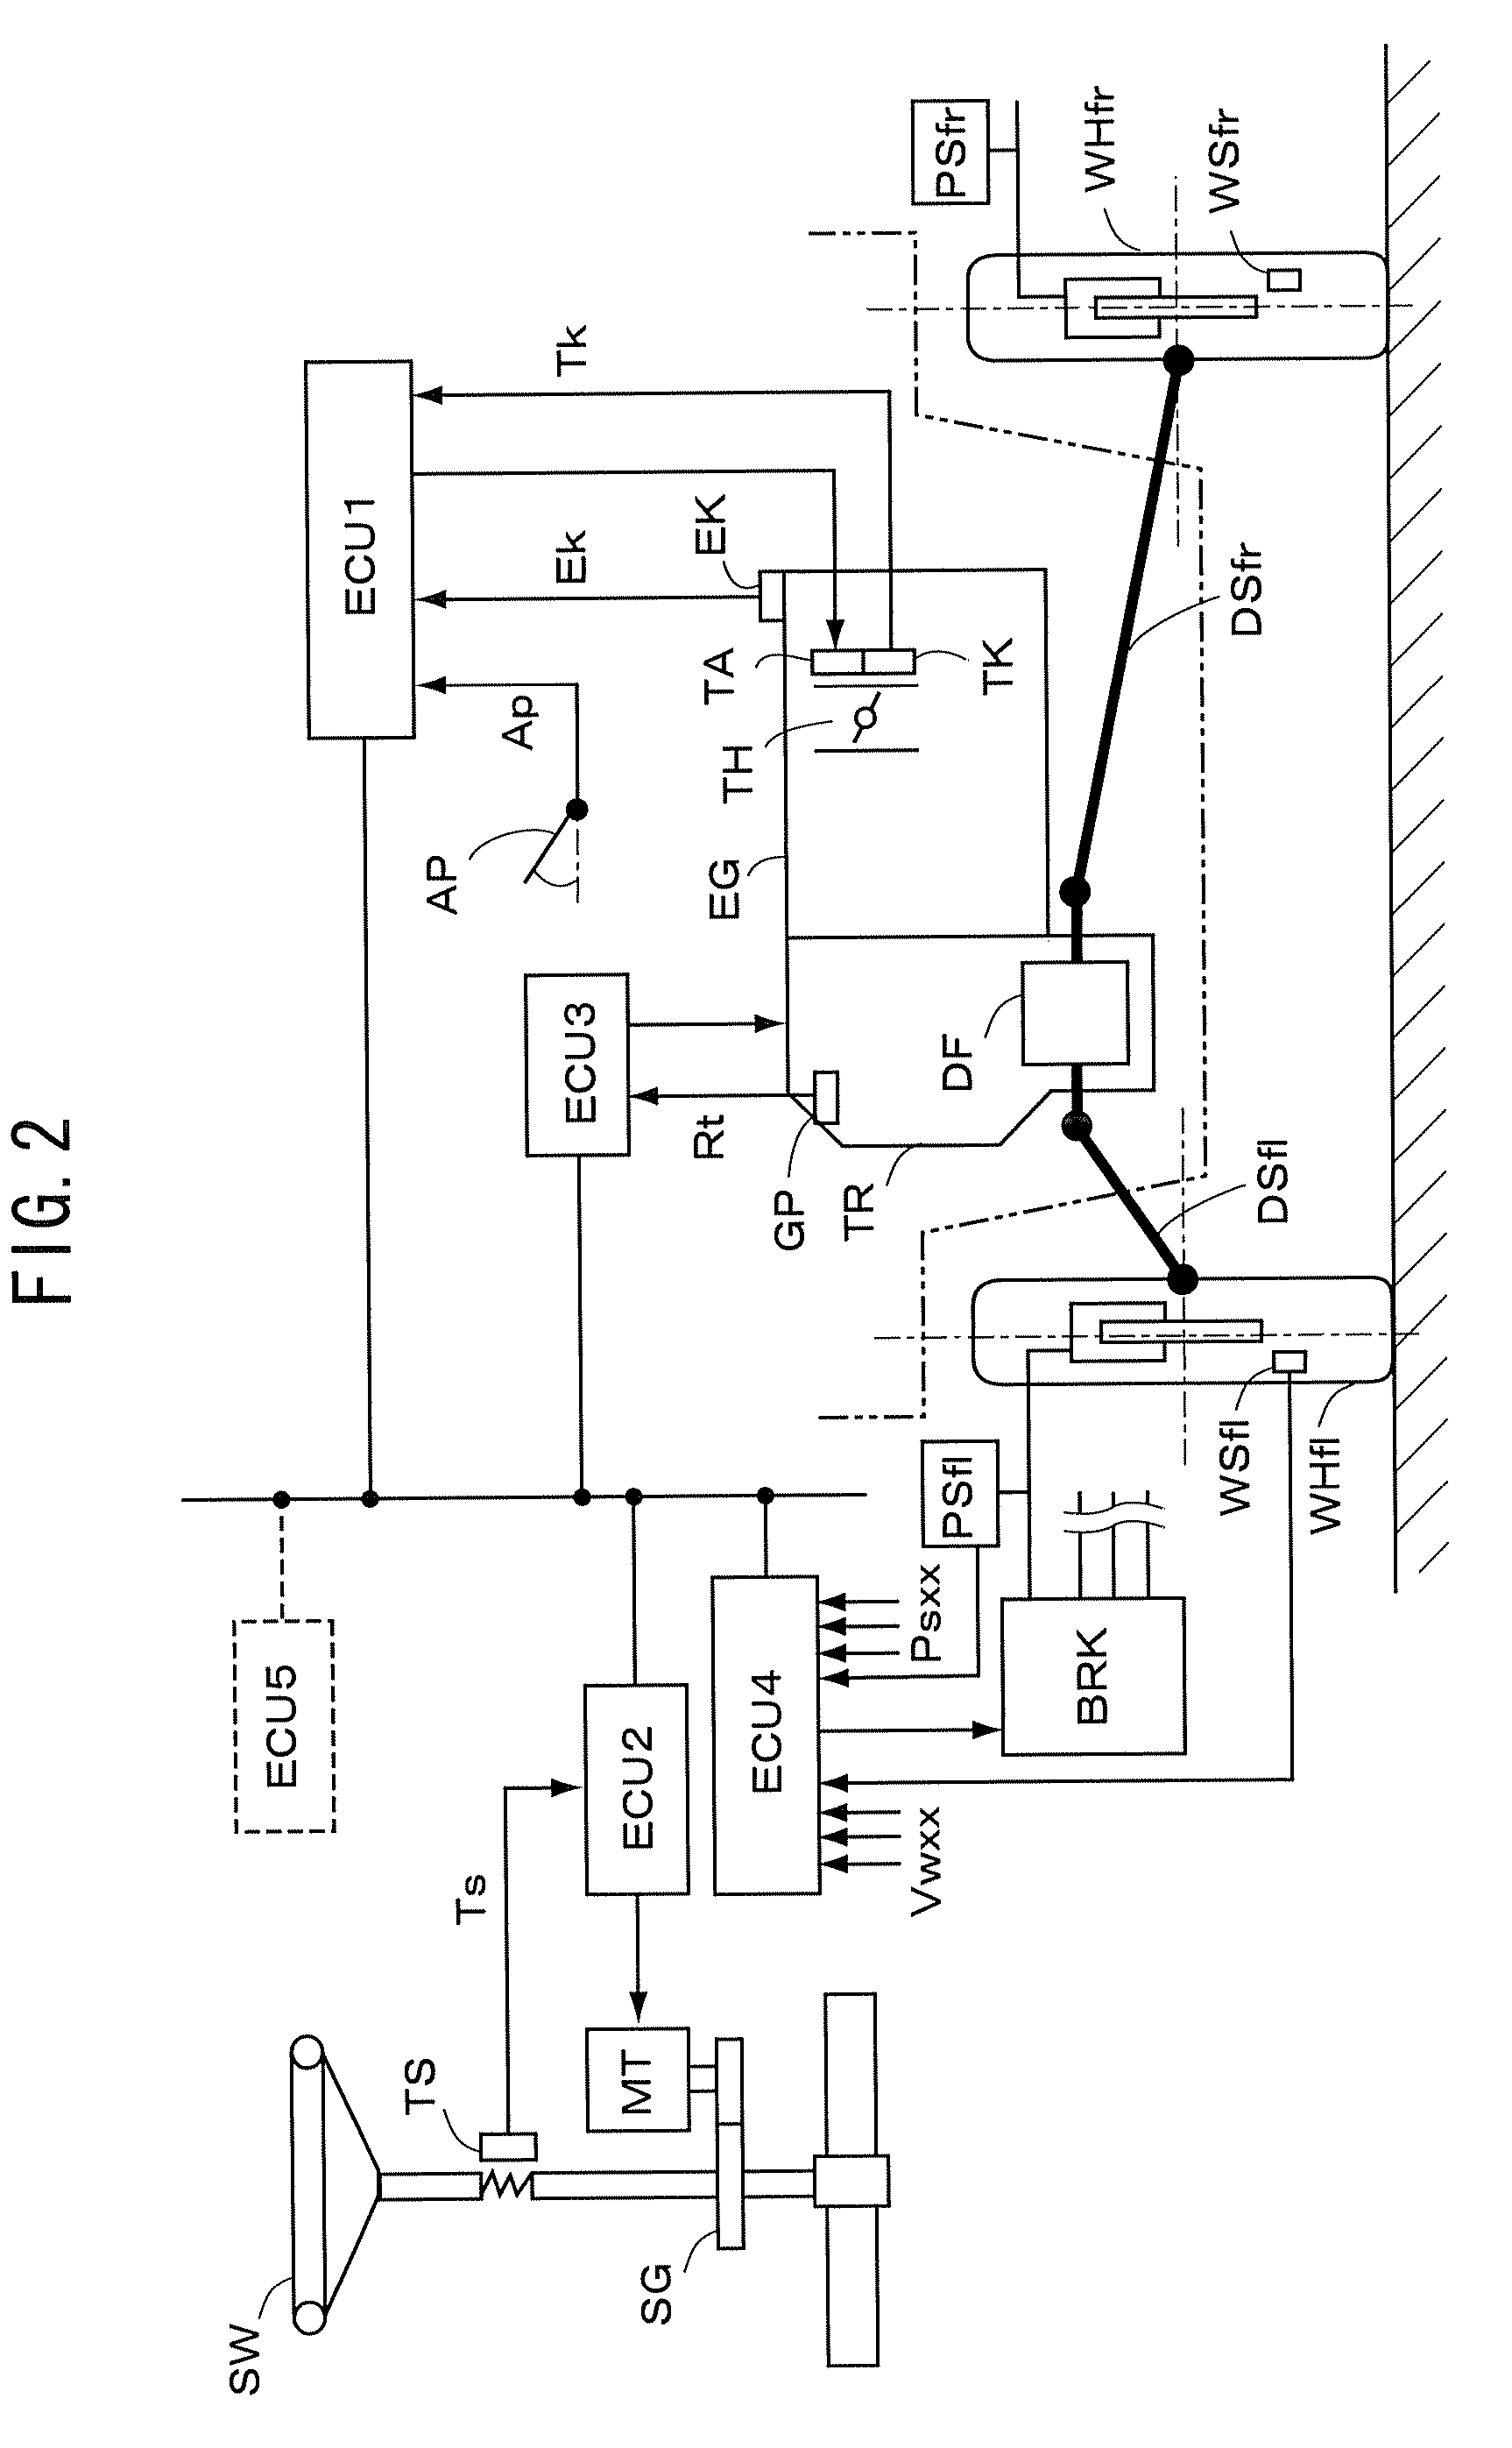 Steering Control Apparatus for a Vehicle